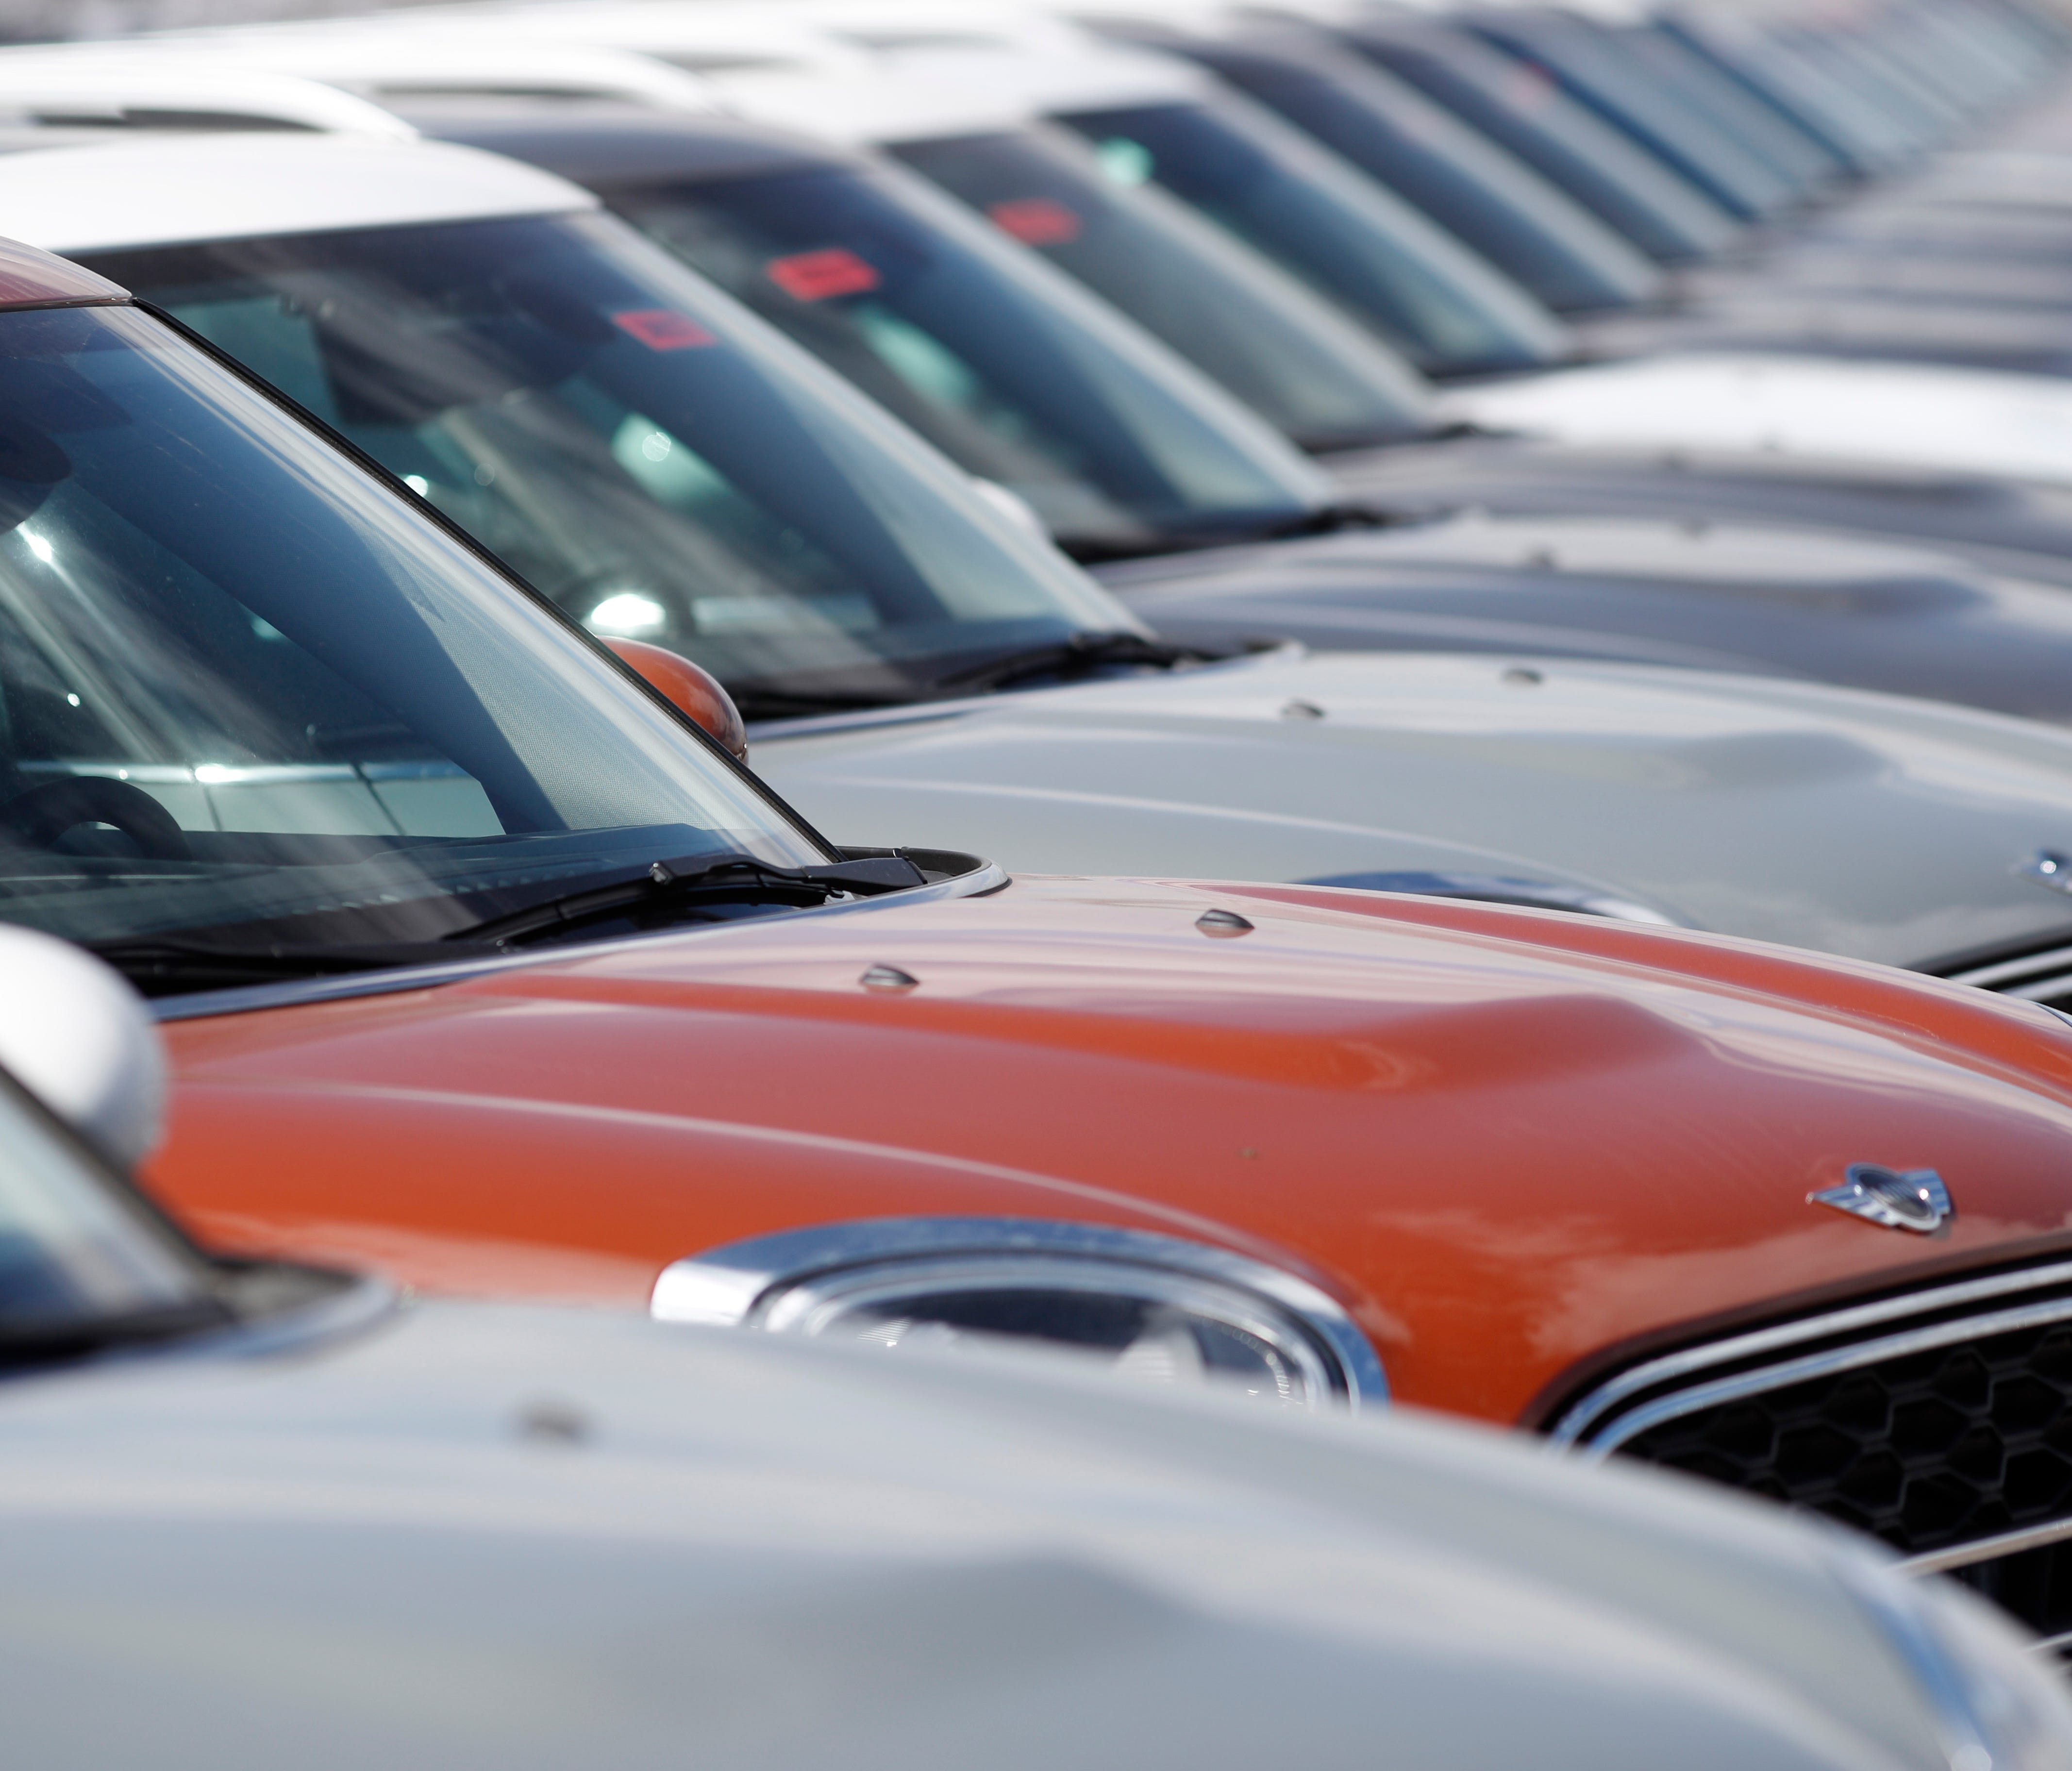 A long row of 2018 Countryman models is shown at a Mini Cooper dealership in Highlands Ranch, Colo. On Friday, March 23, the Commerce Department releases its February report on durable goods.